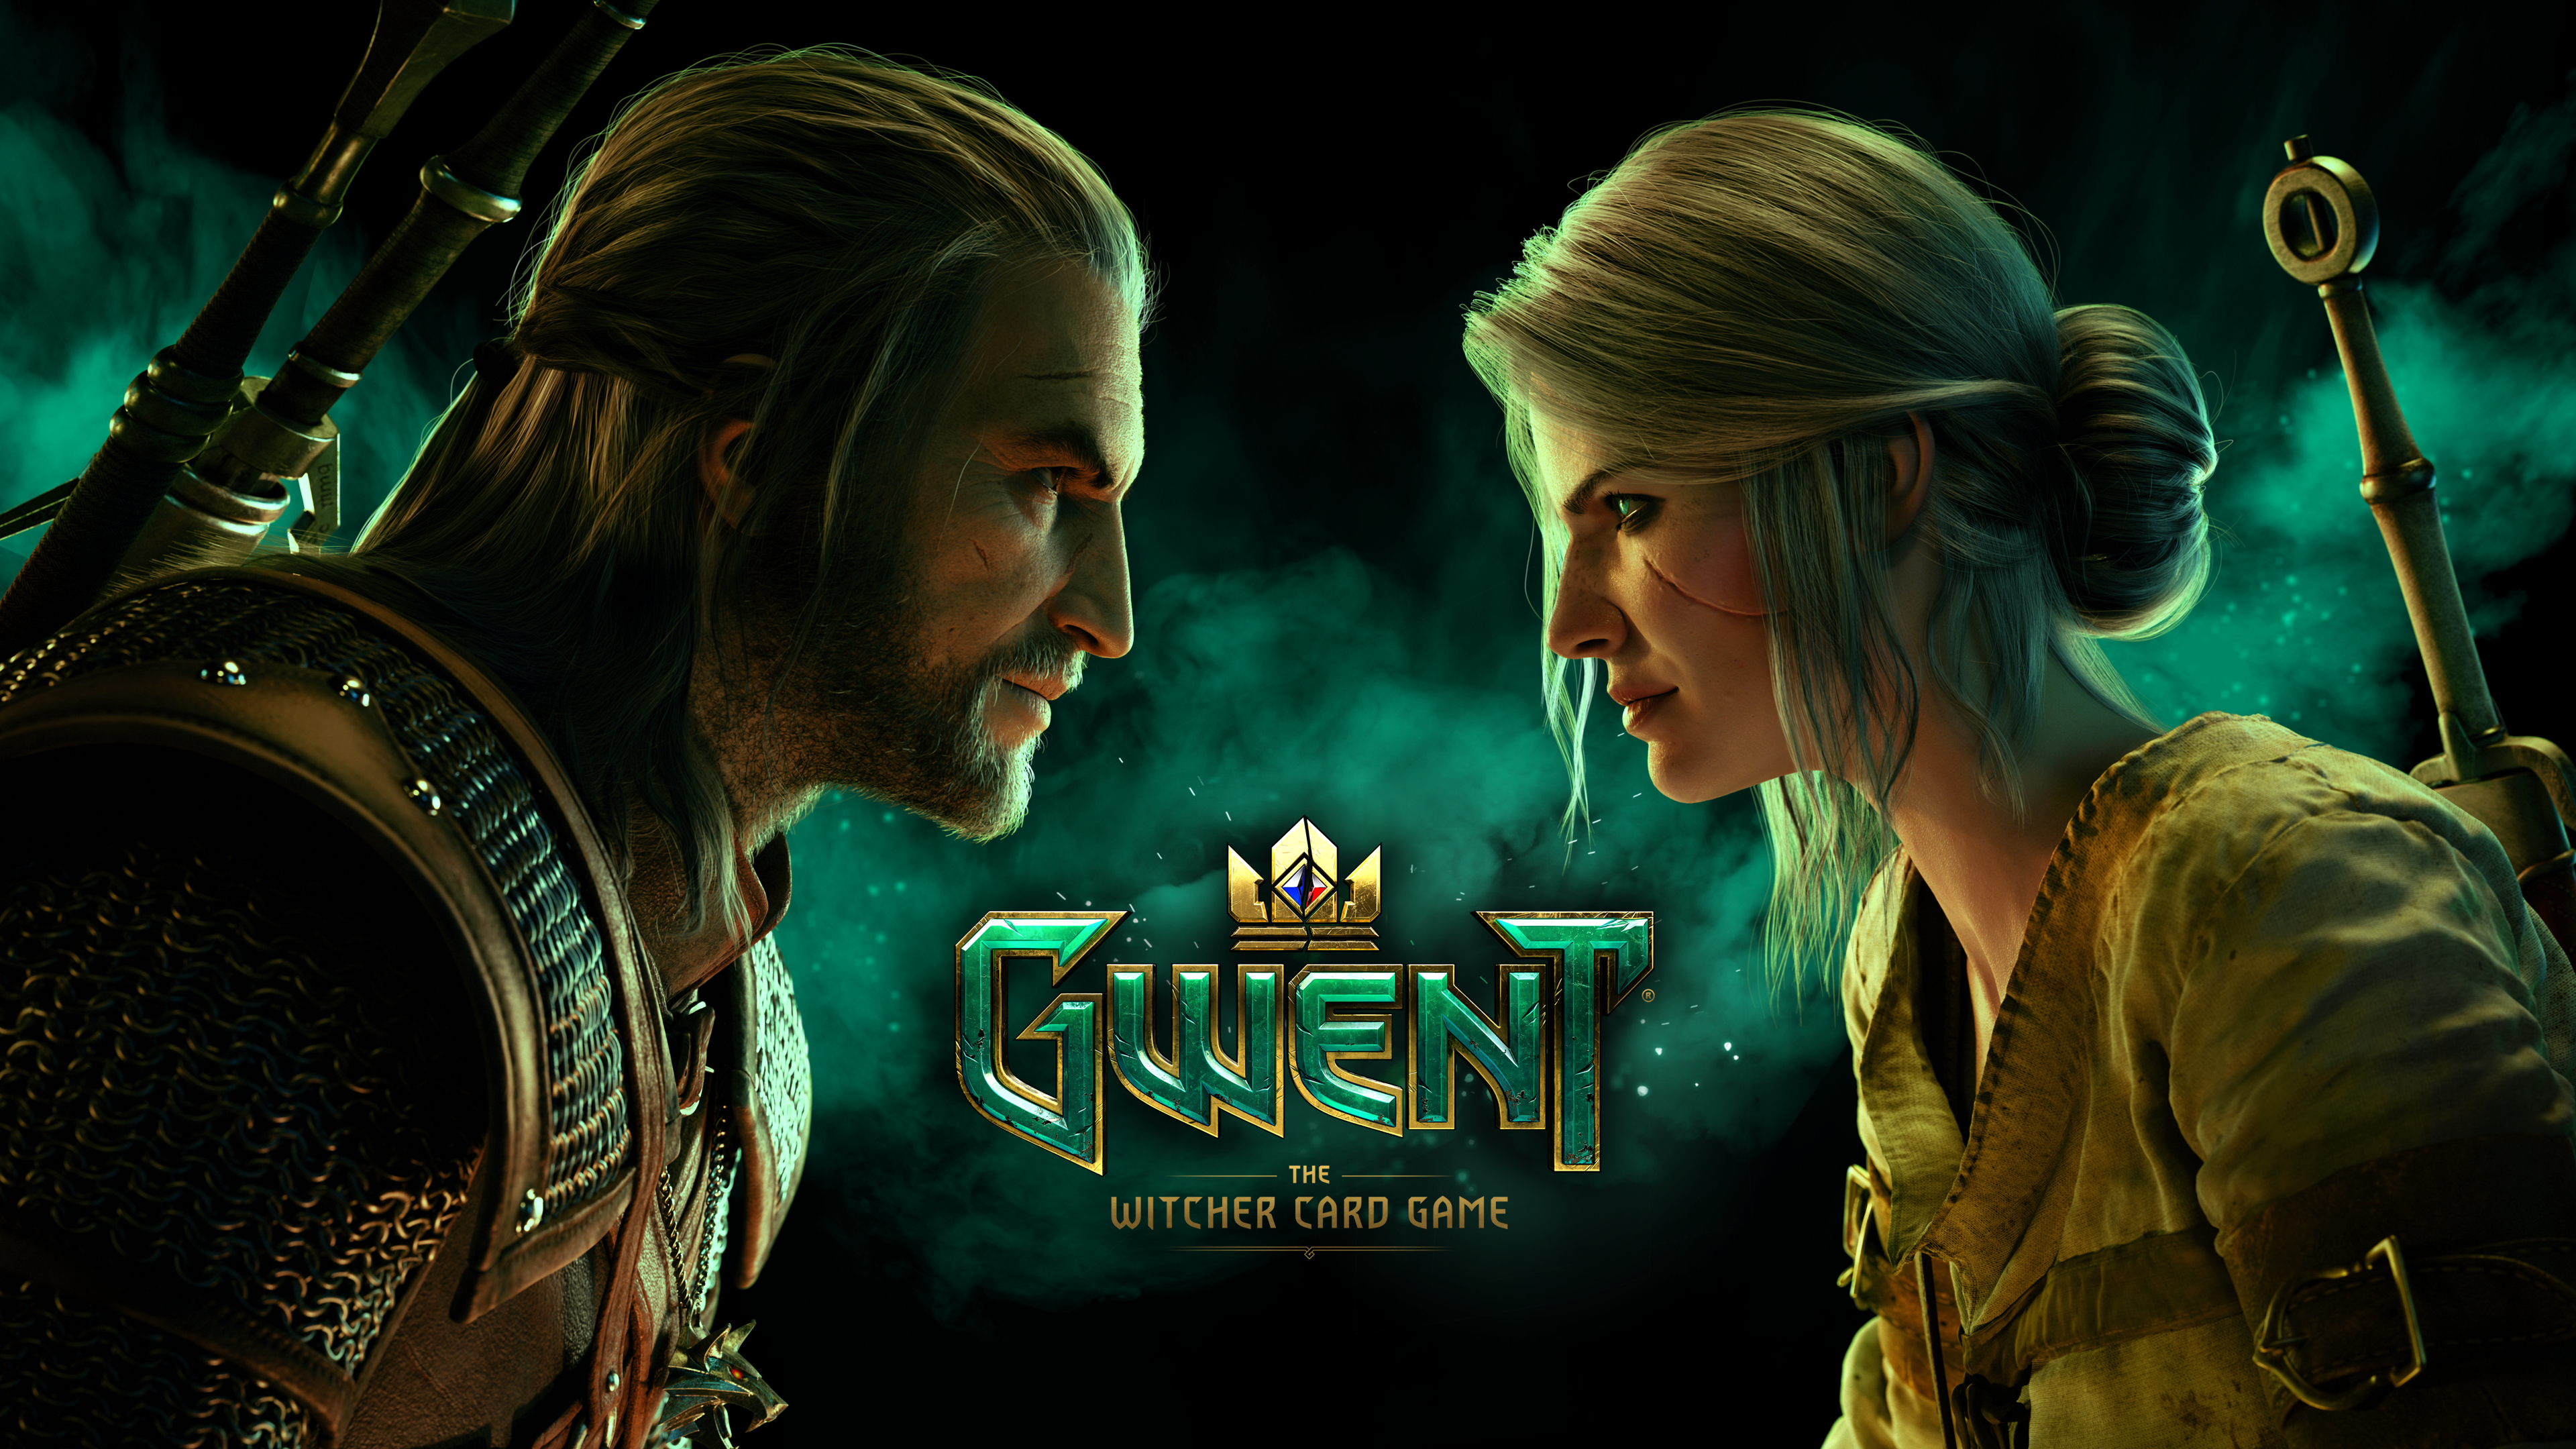 is gwent online purchases safe